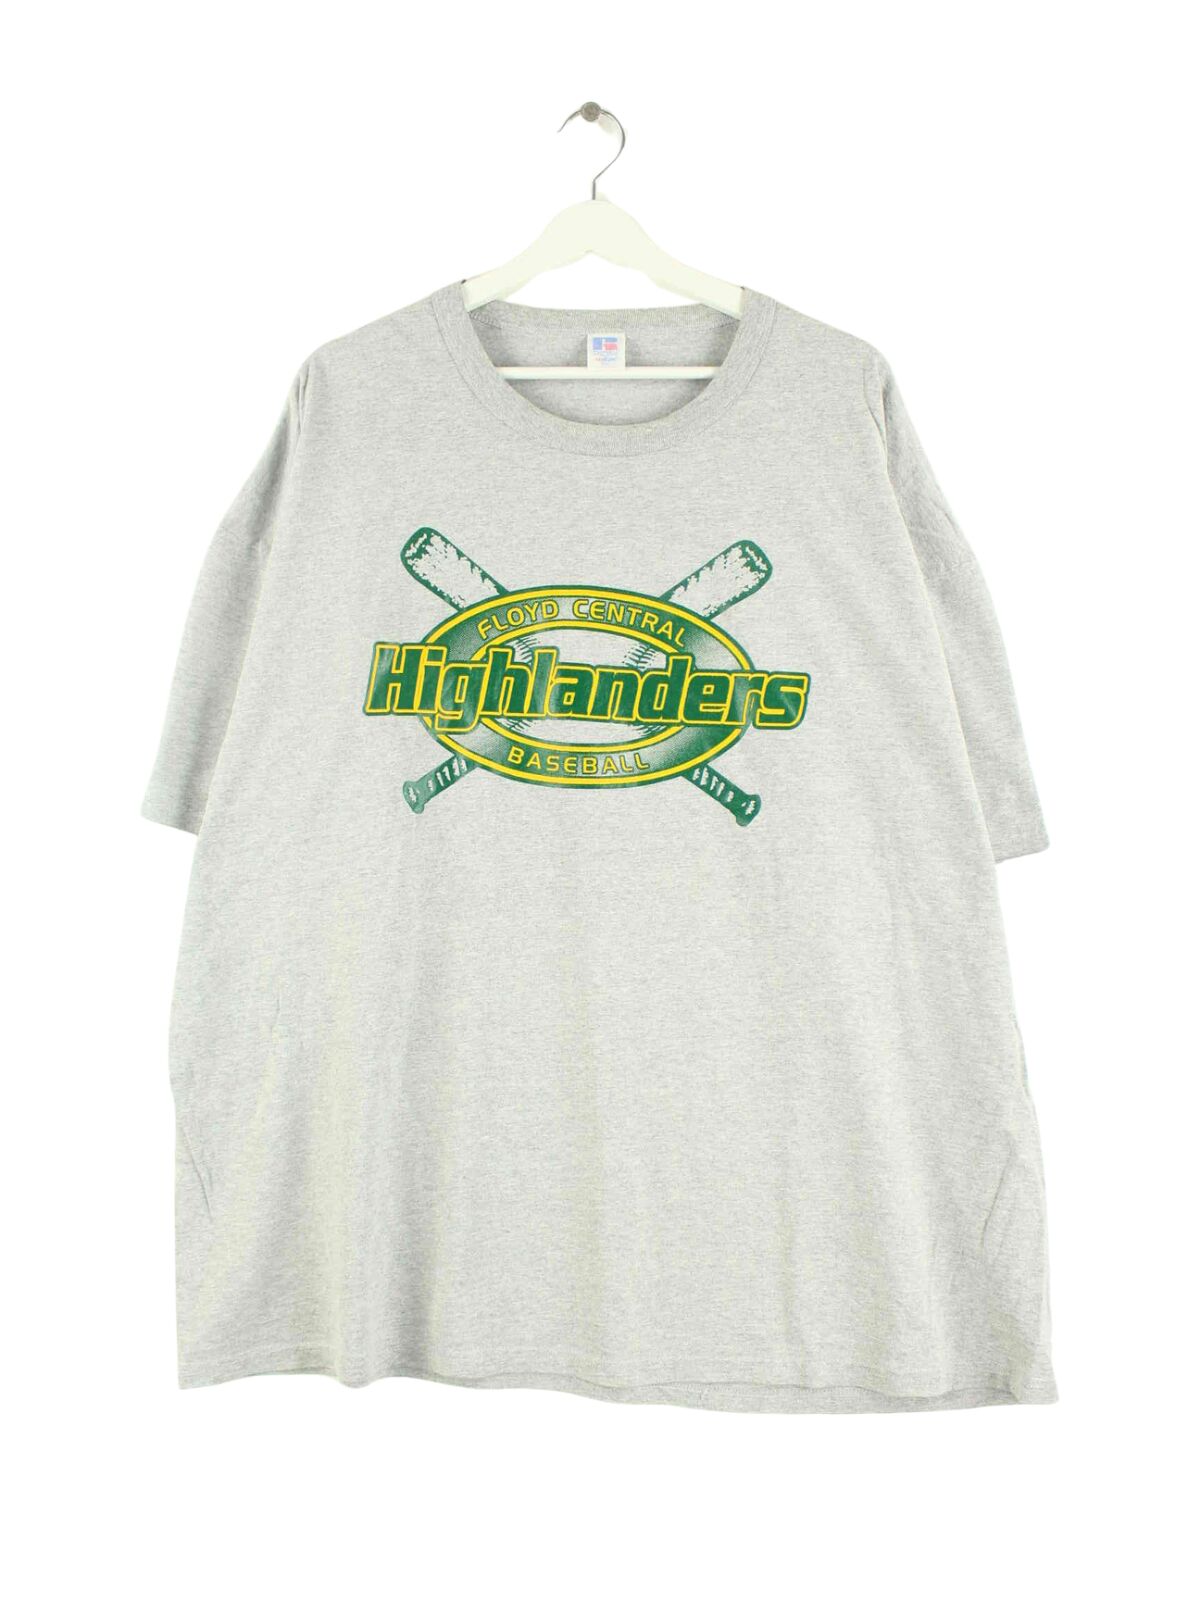 Russell Athletic Highlanders Print T-Shirt Grau XXL (front image)